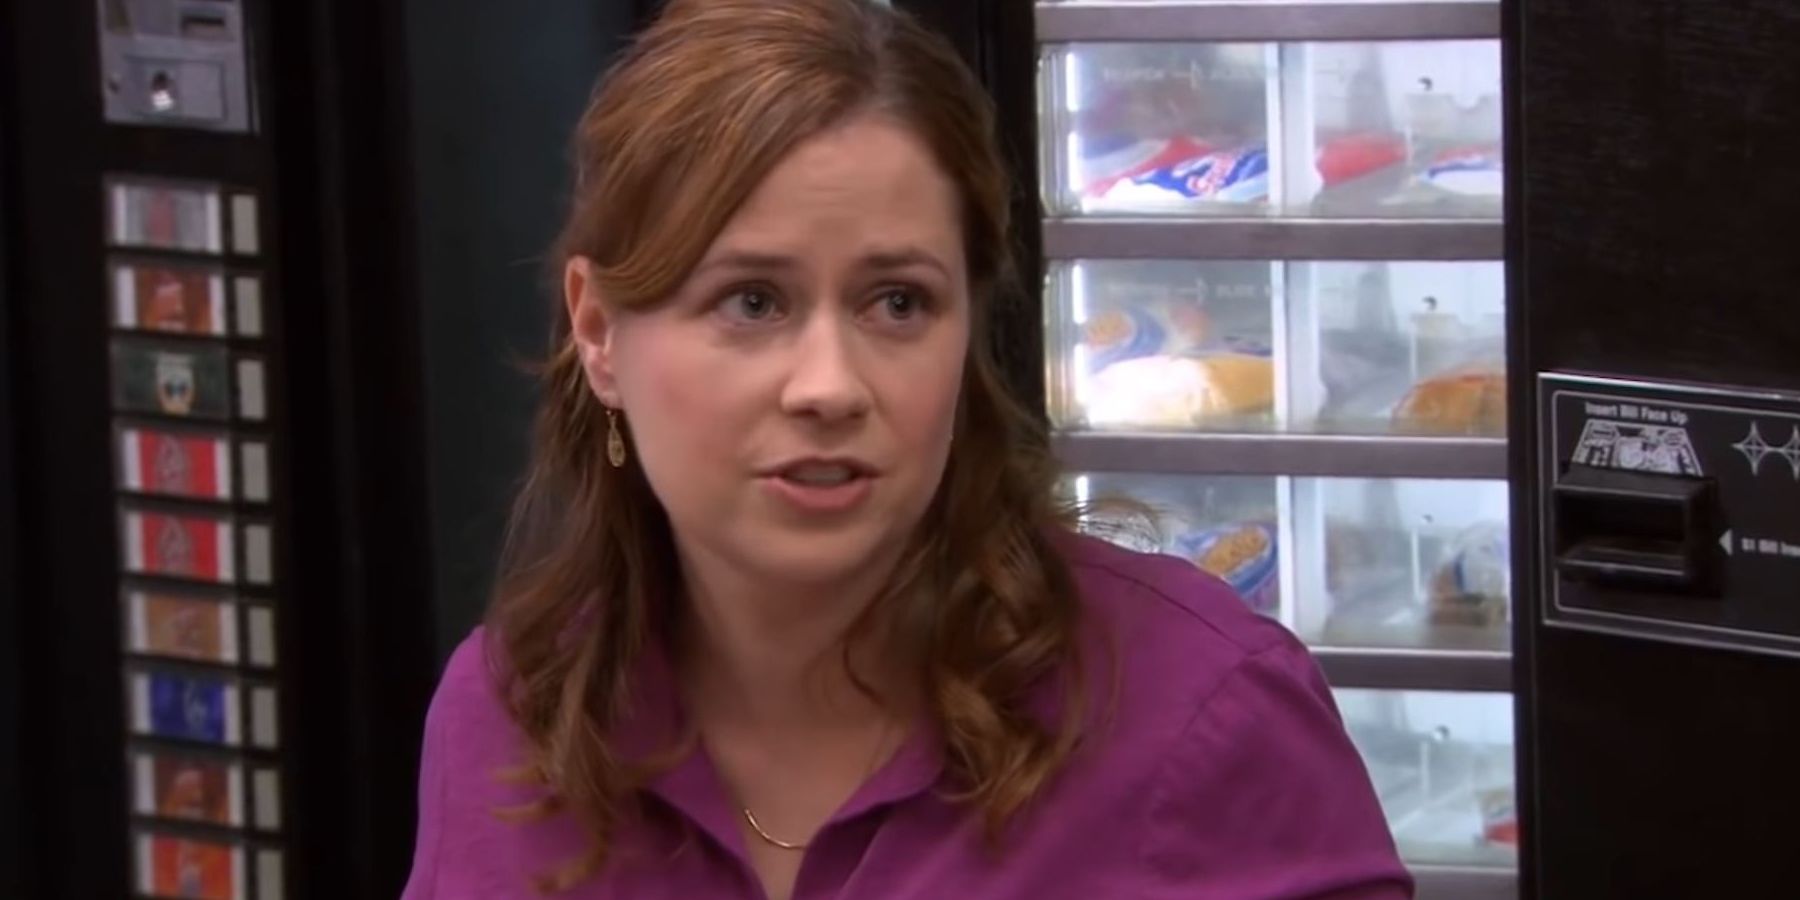 The Office Pam tells Ryan what she thinks of him